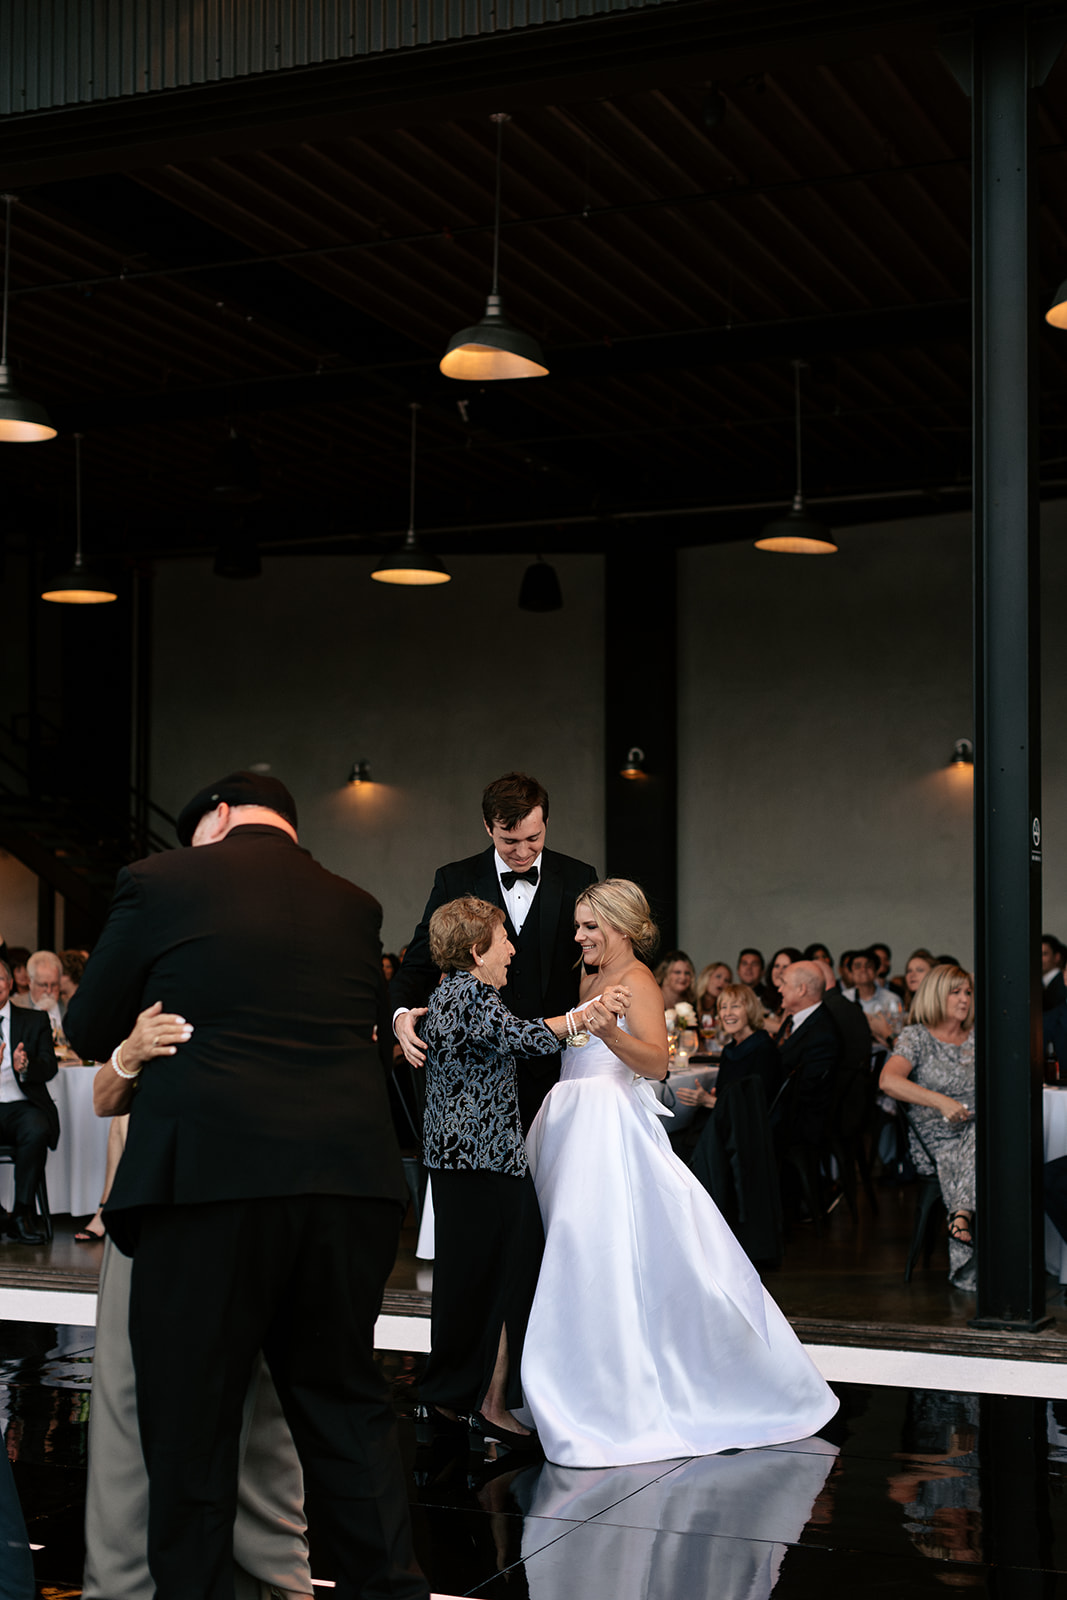 hangar 21 wedding fullerton california bride and groom first dance songs father daughter first dance wedding pictures